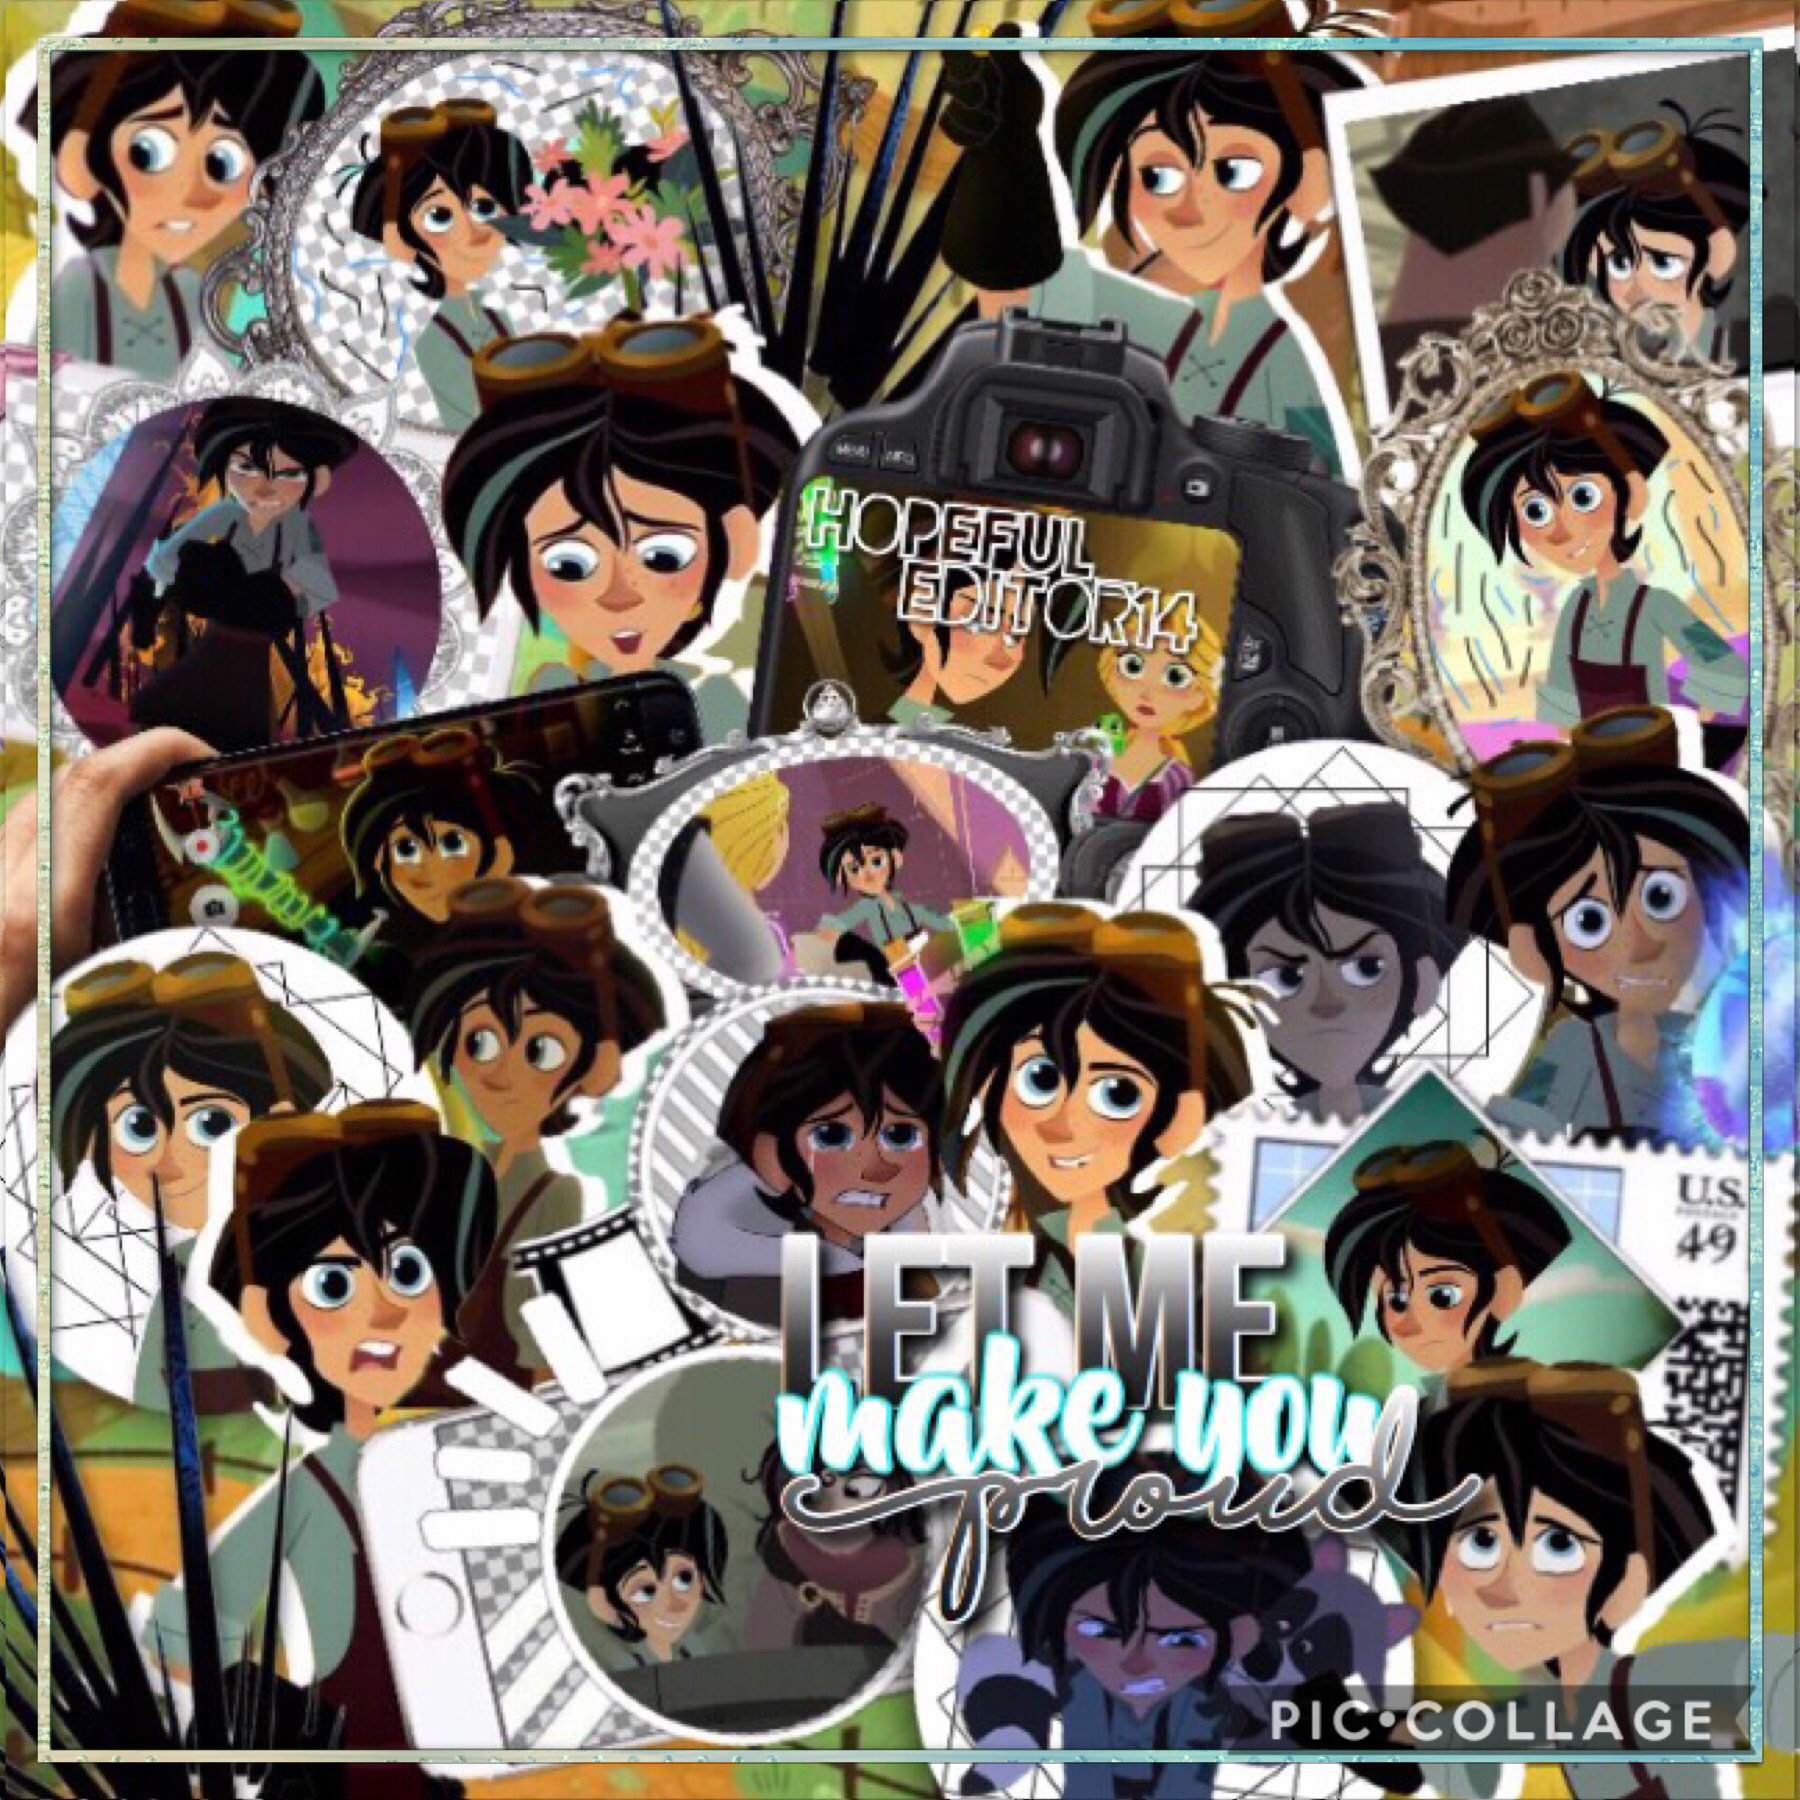 And here is a Varian collage for you. Although I doubt many of you actually know who Varian is. I loved making this so much and I’m so proud of it. Please enter my icon contest if you haven’t, the deadline is approaching quickly...
Please don’t judge me..